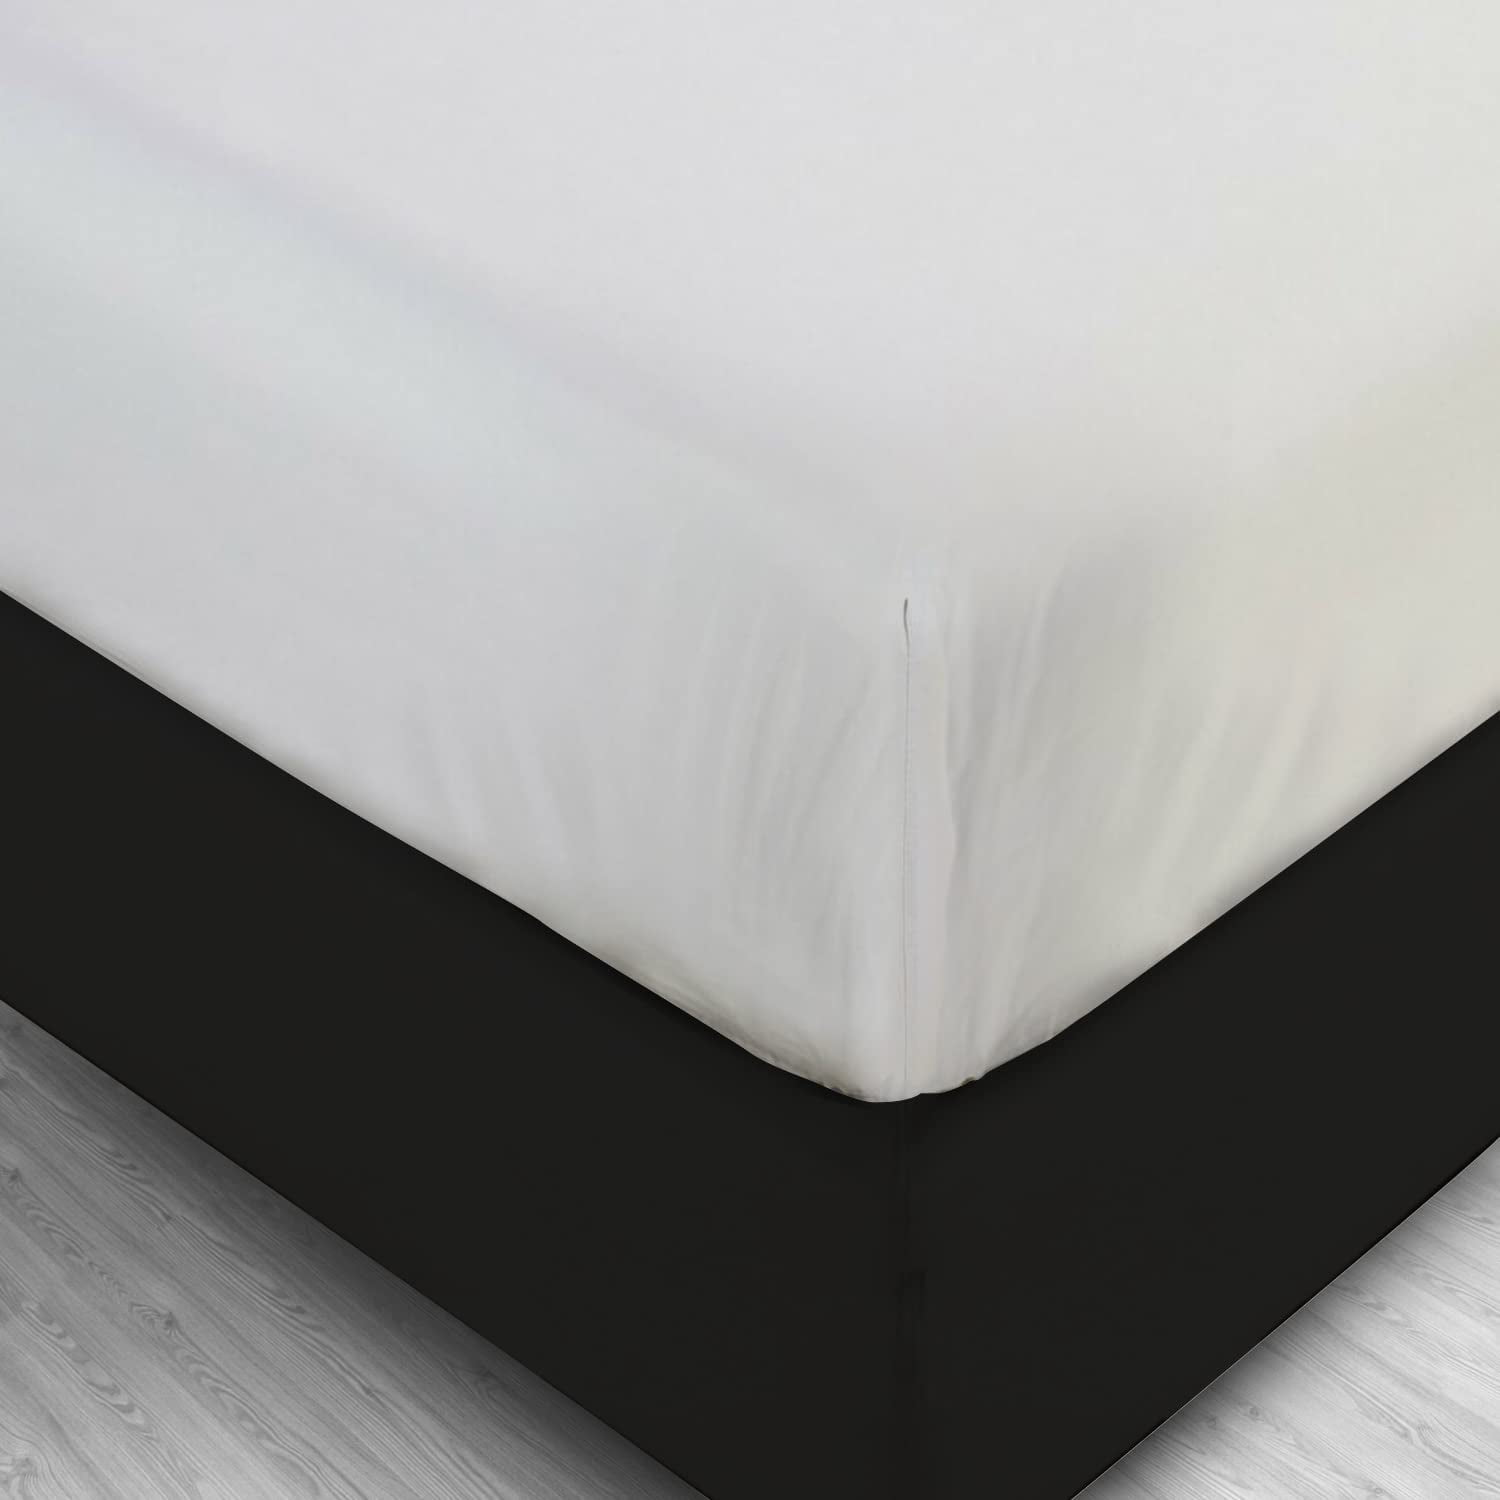 mattress protectors poly-cotton for uk KINGSIZE BED 5' x 6'6" bed 10" depth 